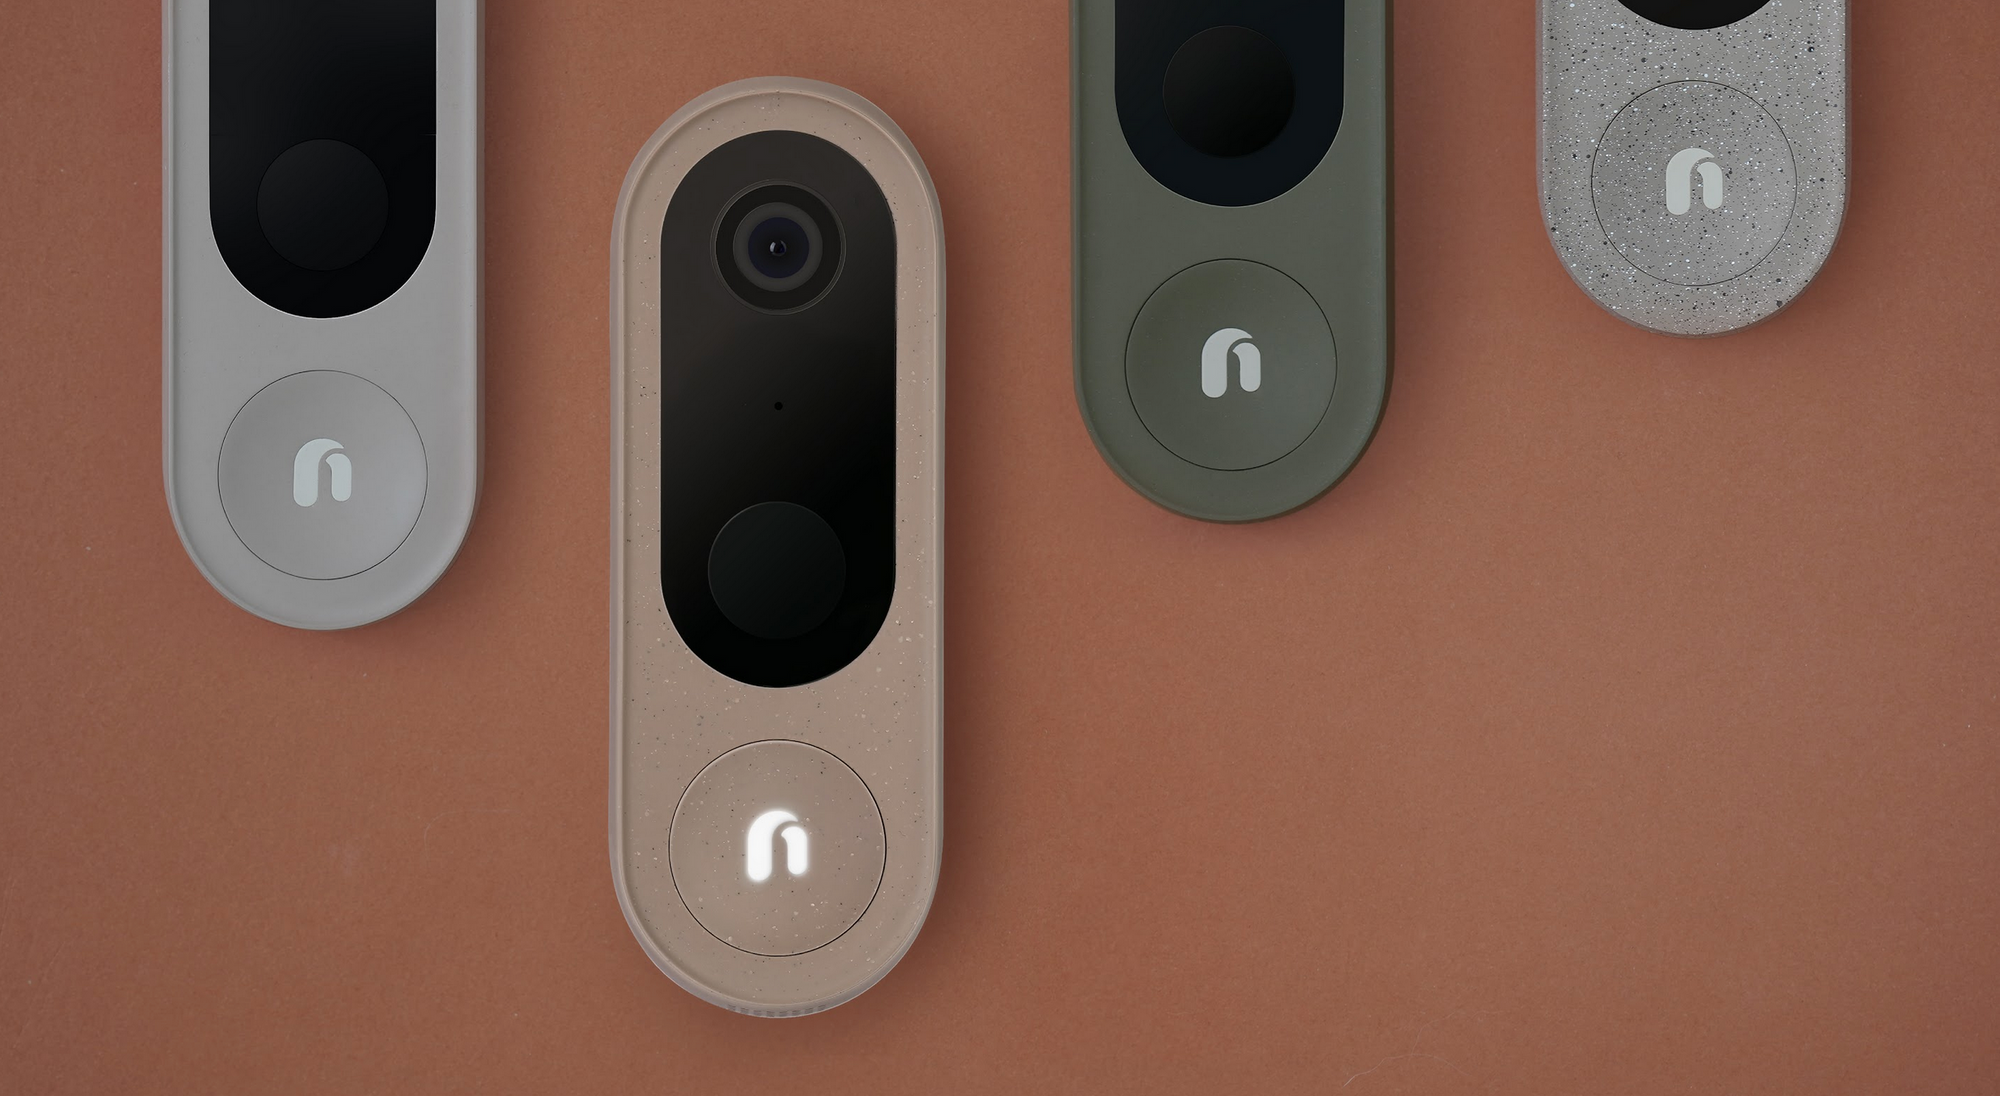 Nooie Doorbell Cam Snags Recommended Badge From IBT